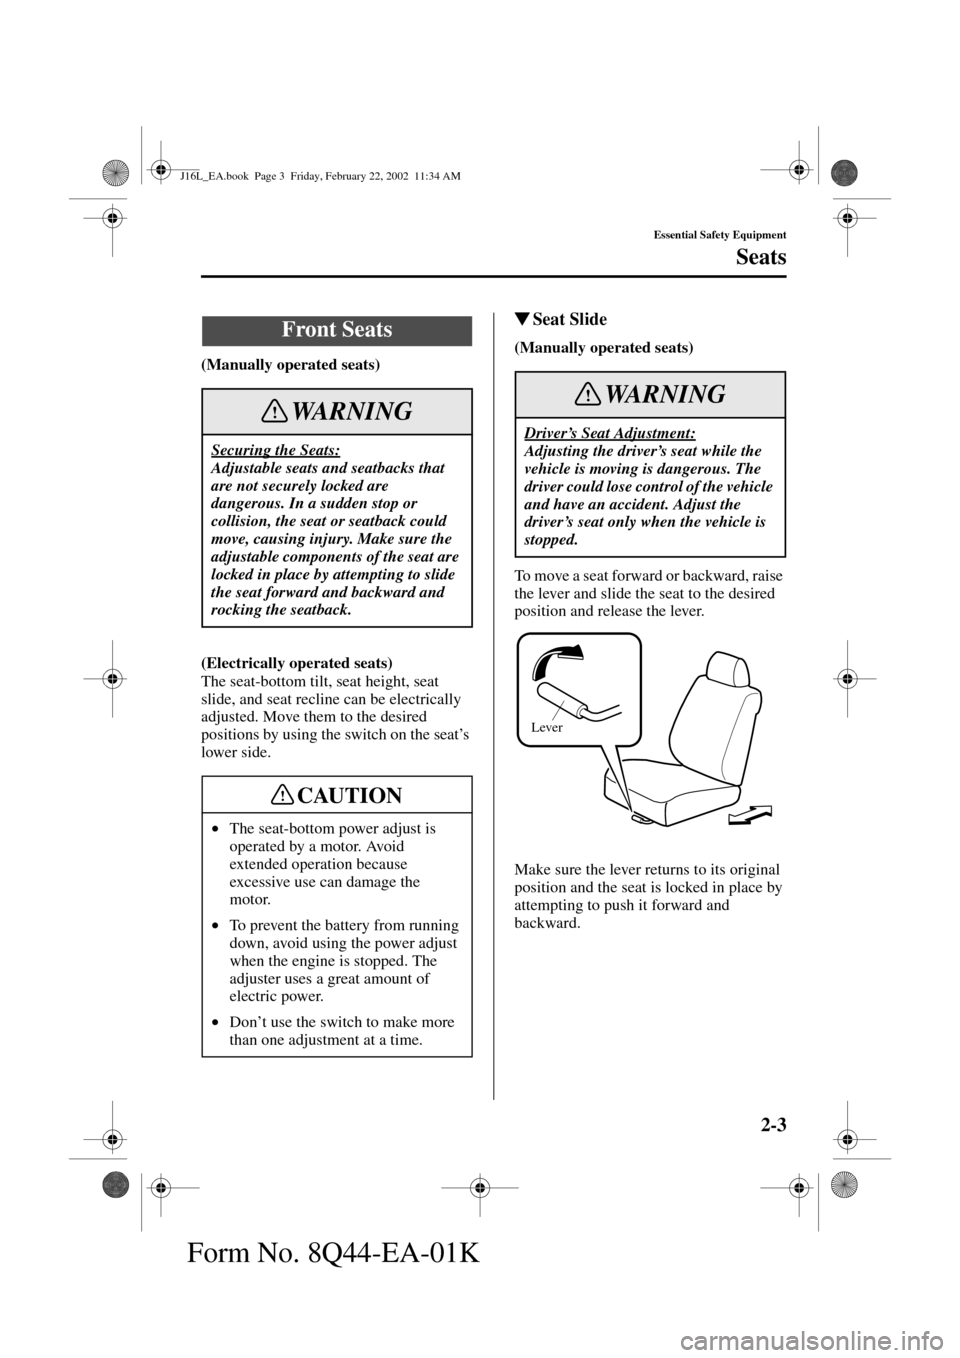 MAZDA MODEL MPV 2002  Owners Manual (in English) 2-3
Essential Safety Equipment
Seats
Form No. 8Q44-EA-01K
(Manually operated seats)
(Electrically operated seats)
The seat-bottom tilt, seat height, seat 
slide, and seat recline can be electrically 
